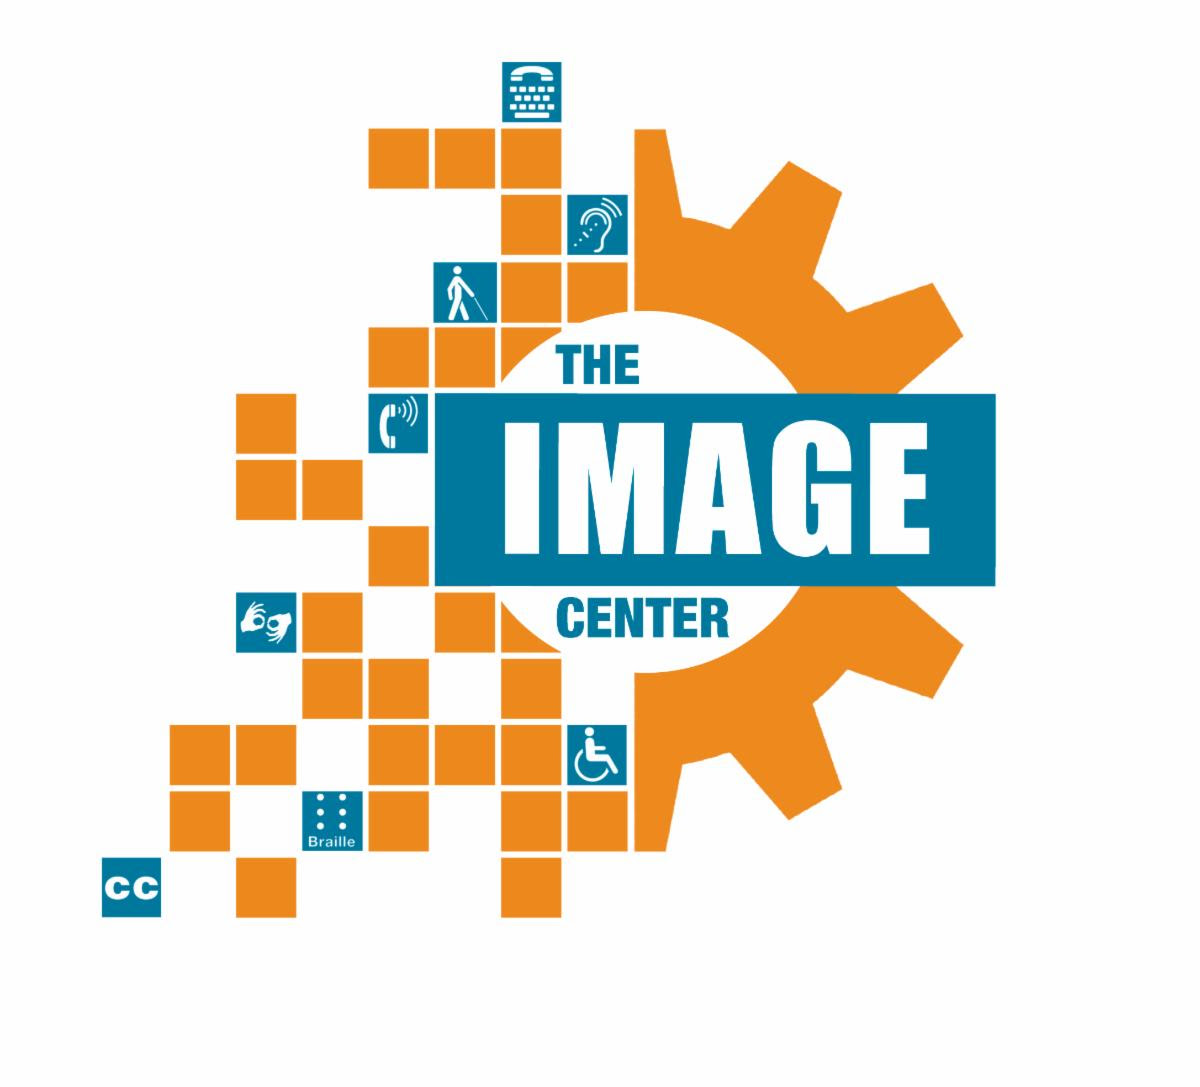 Logo for The IMAGE Center. Logo is teal and orange and includes a sprocket shape and icons representing various types of disabilities.